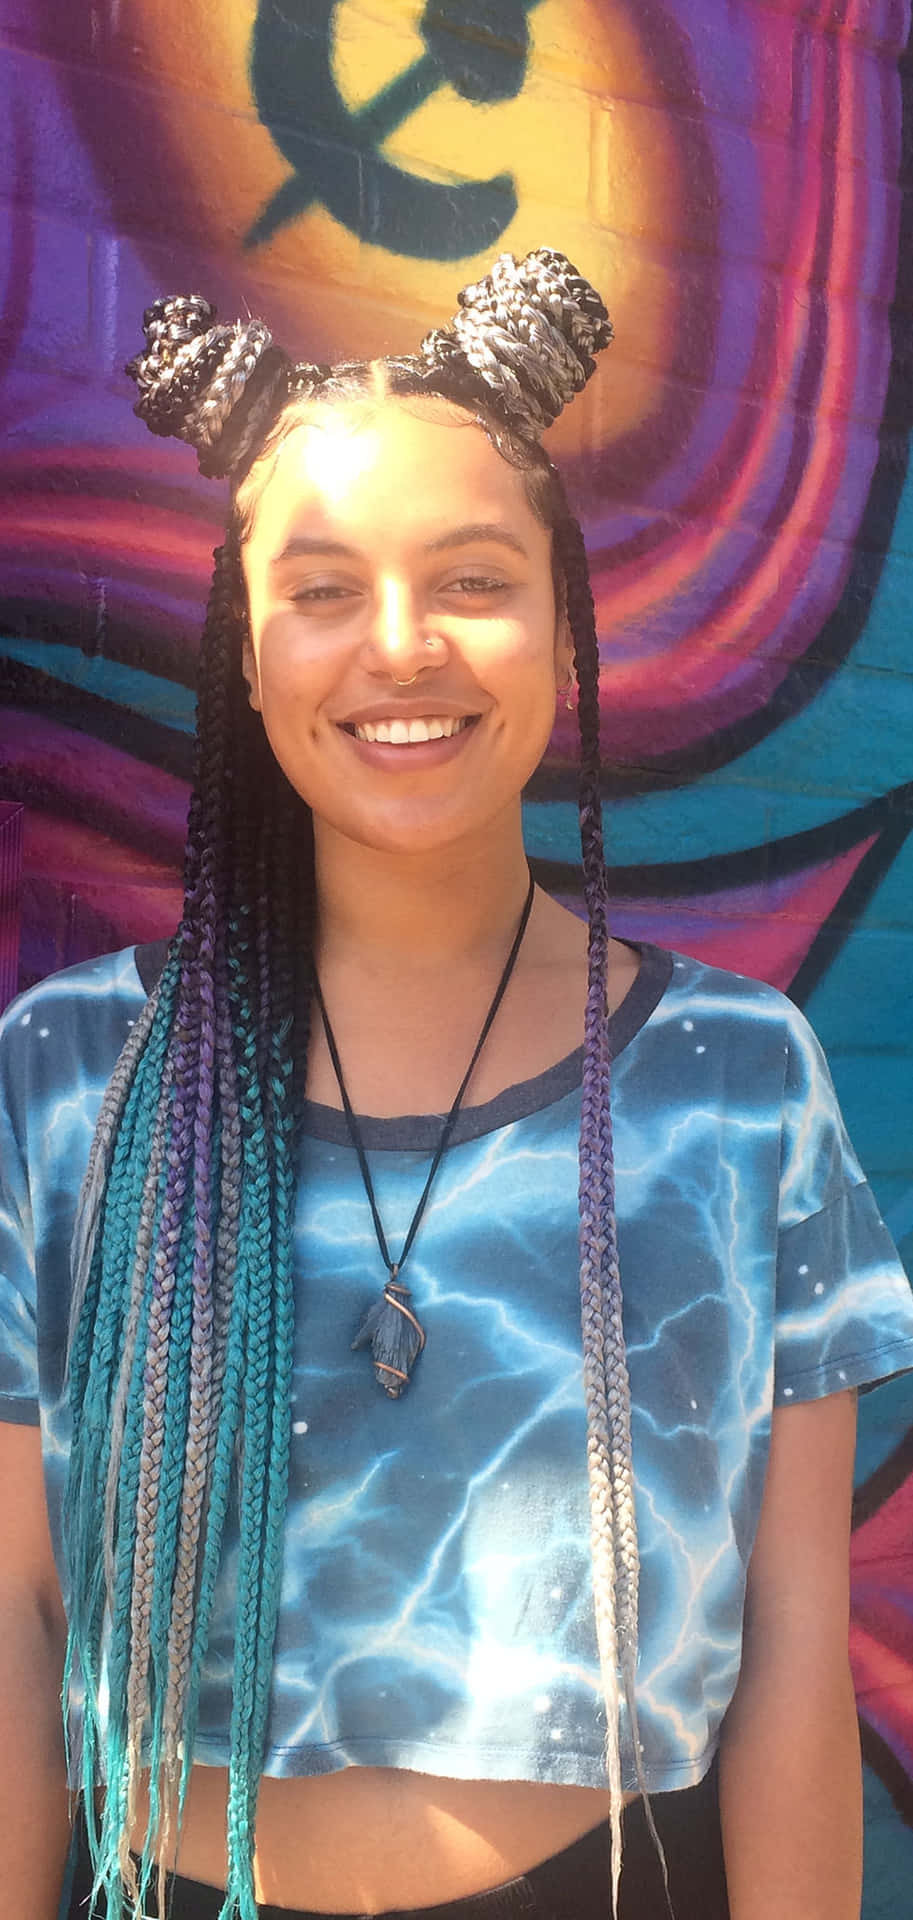 A Young Woman With Braids In Front Of A Graffiti Wall